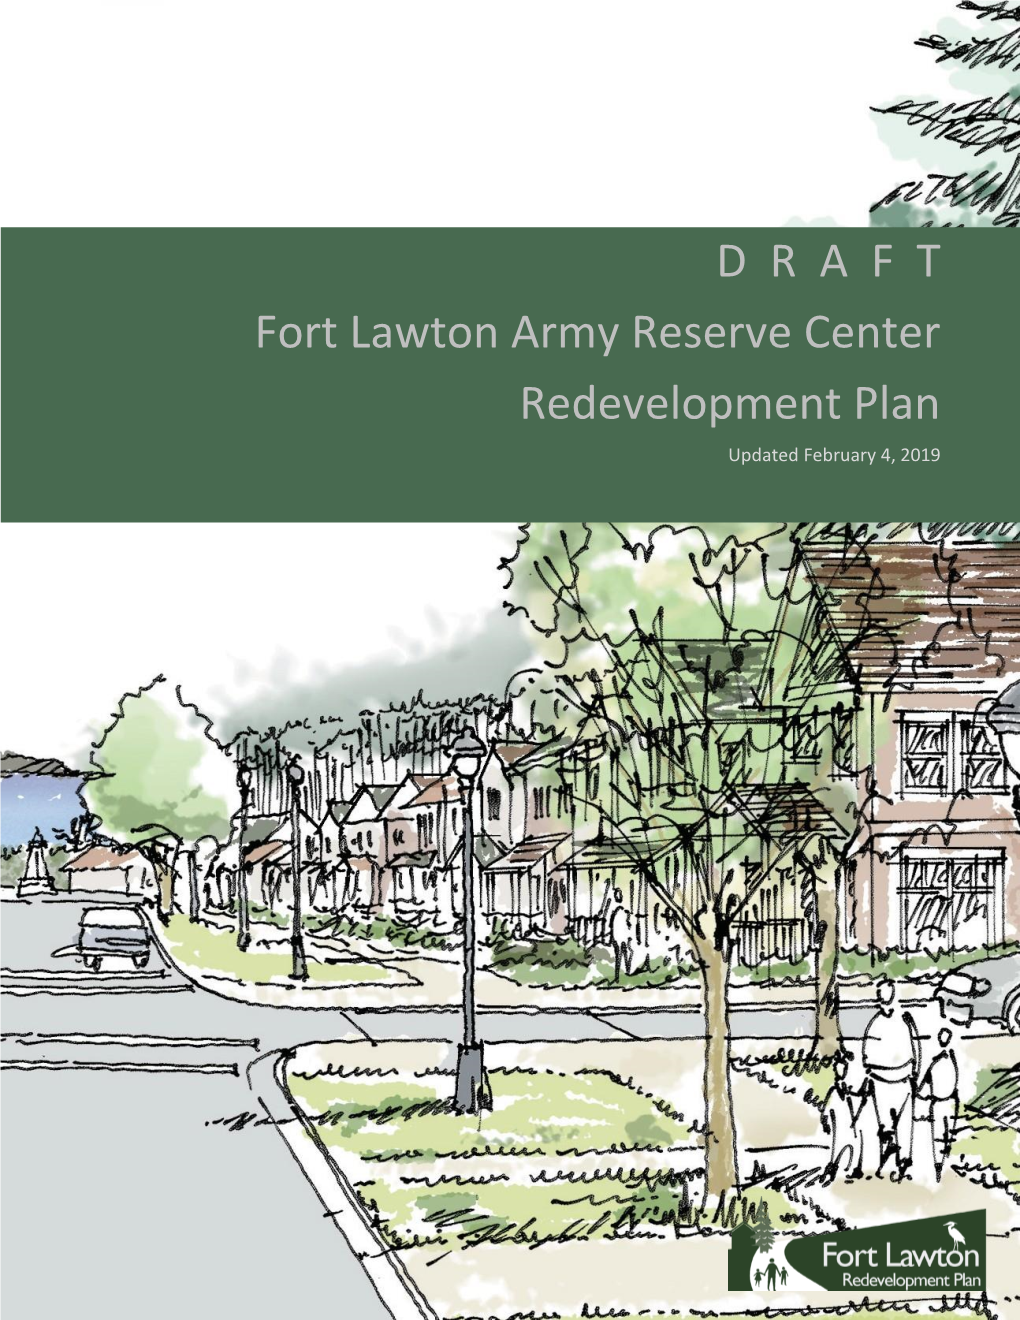 D R a F T Fort Lawton Army Reserve Center Redevelopment Plan